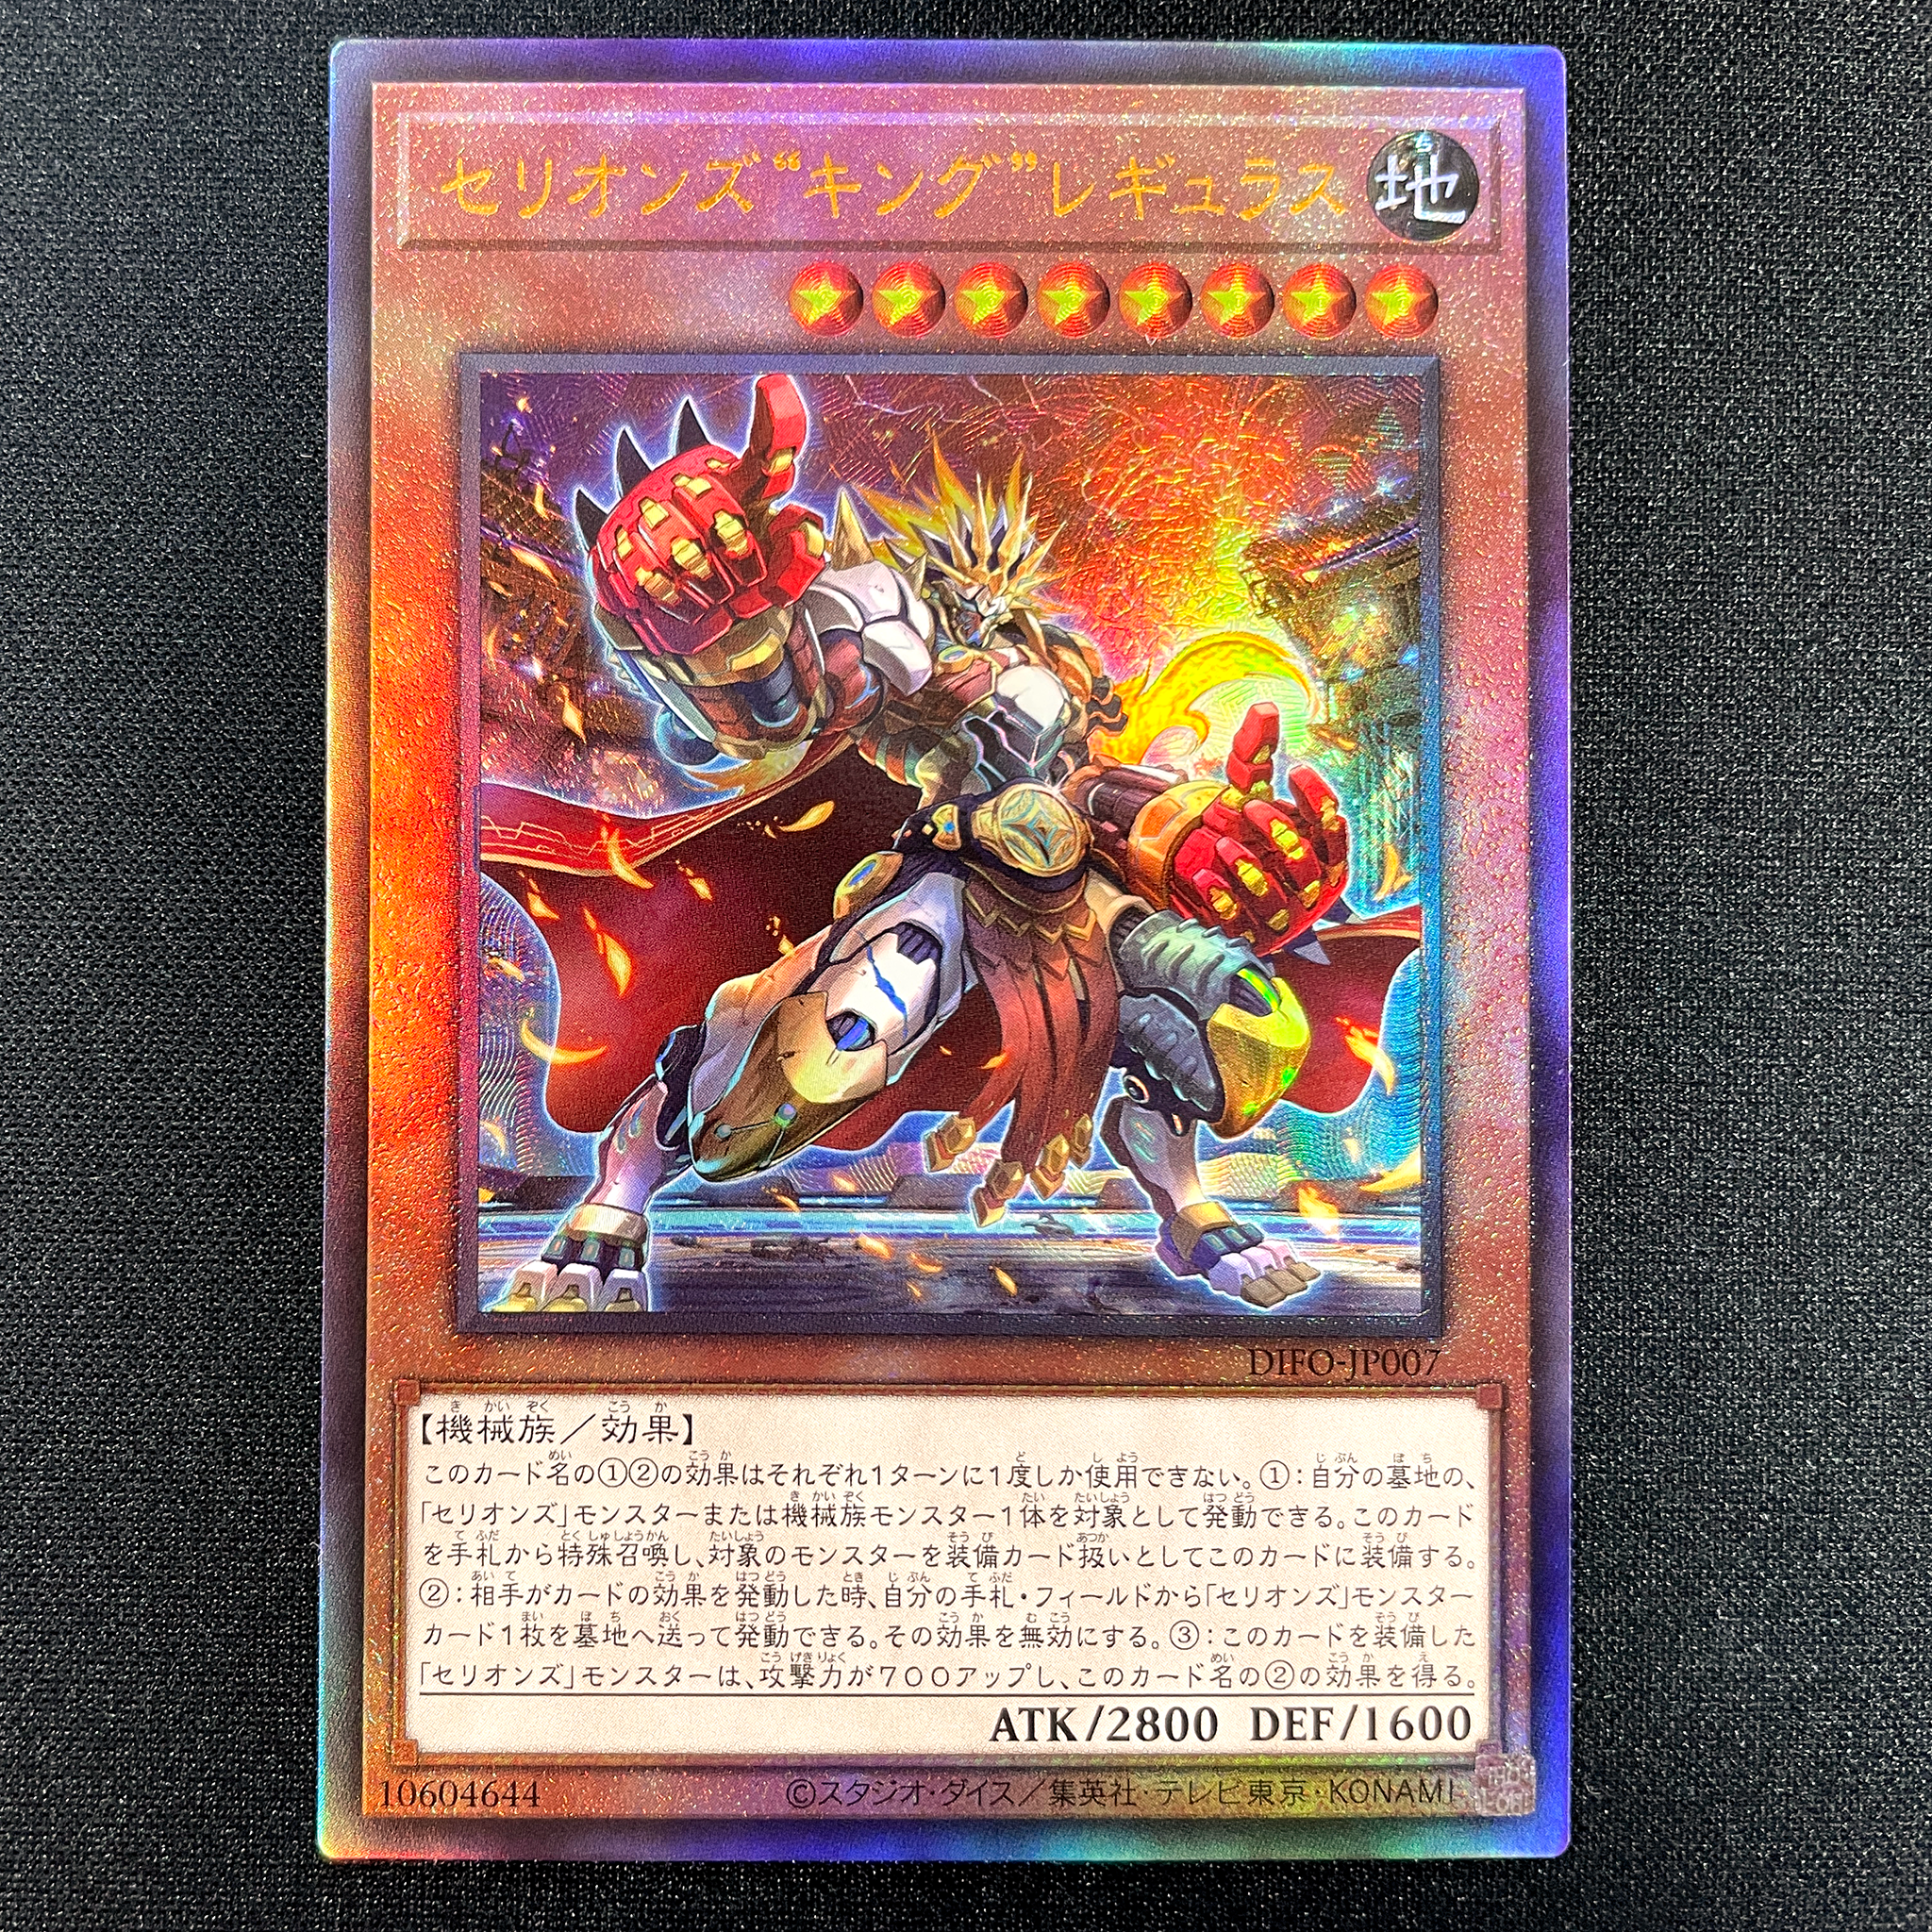 Yu-Gi-Oh! Official Card Game Duel Monsters ｢DIMENSION FORCE｣  Yu-Gi-Oh! Official Card Game DIFO-JP007 Ultimate Rare card